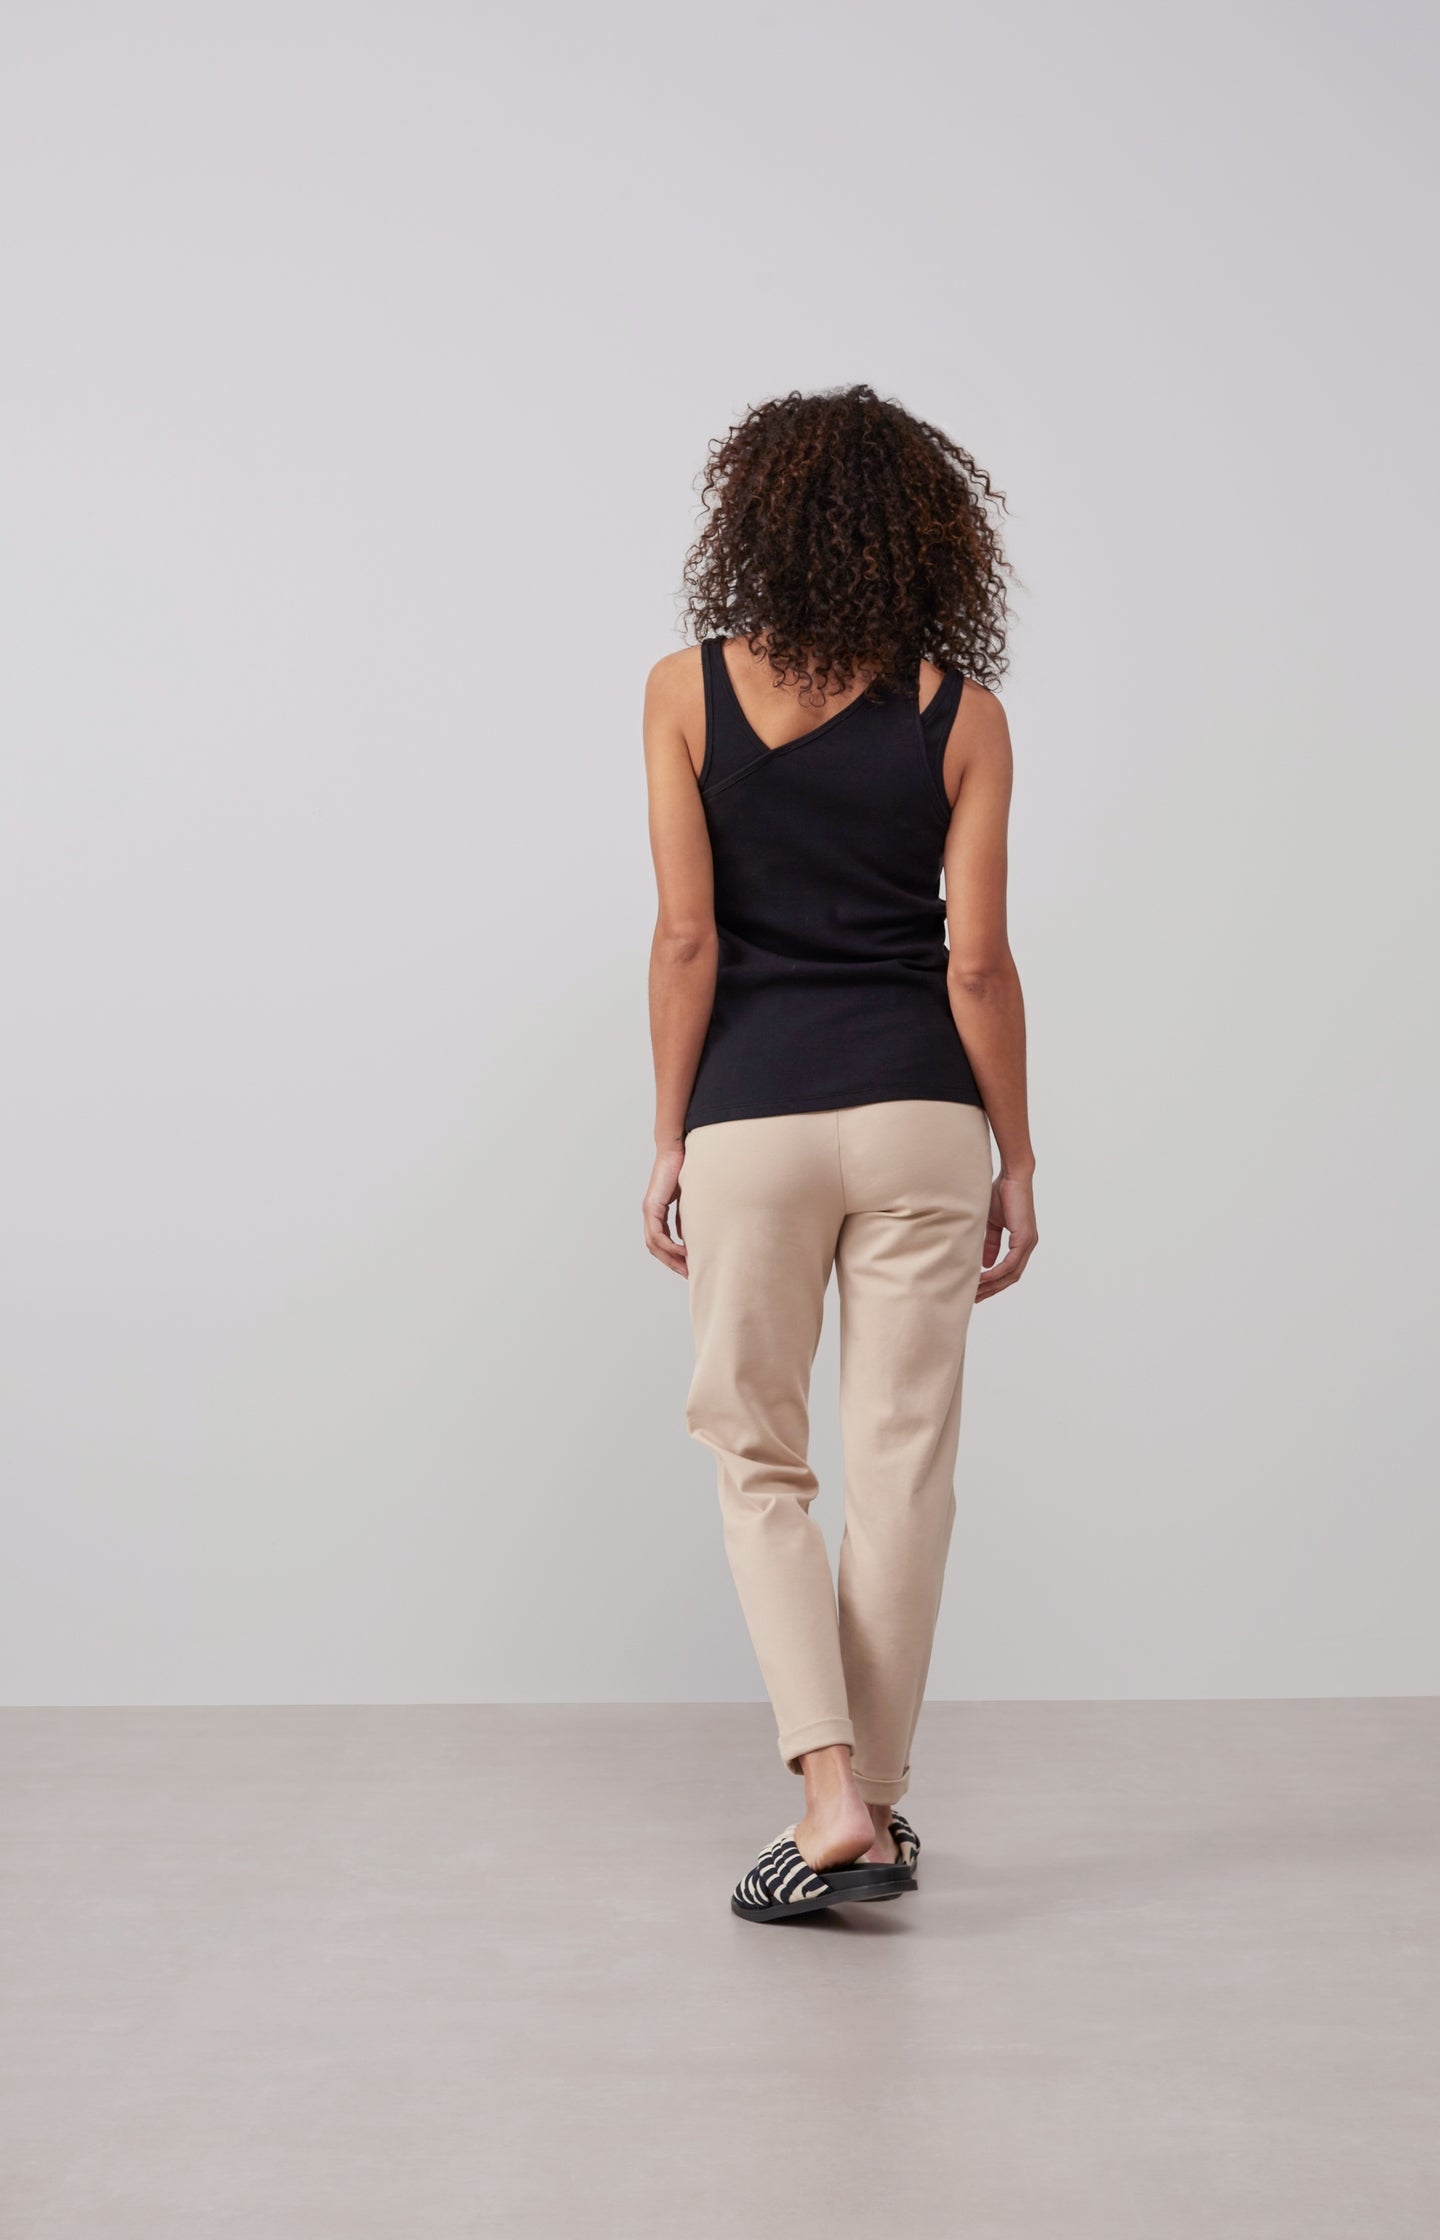 Cotton ribbed top with neck detail in regular fit